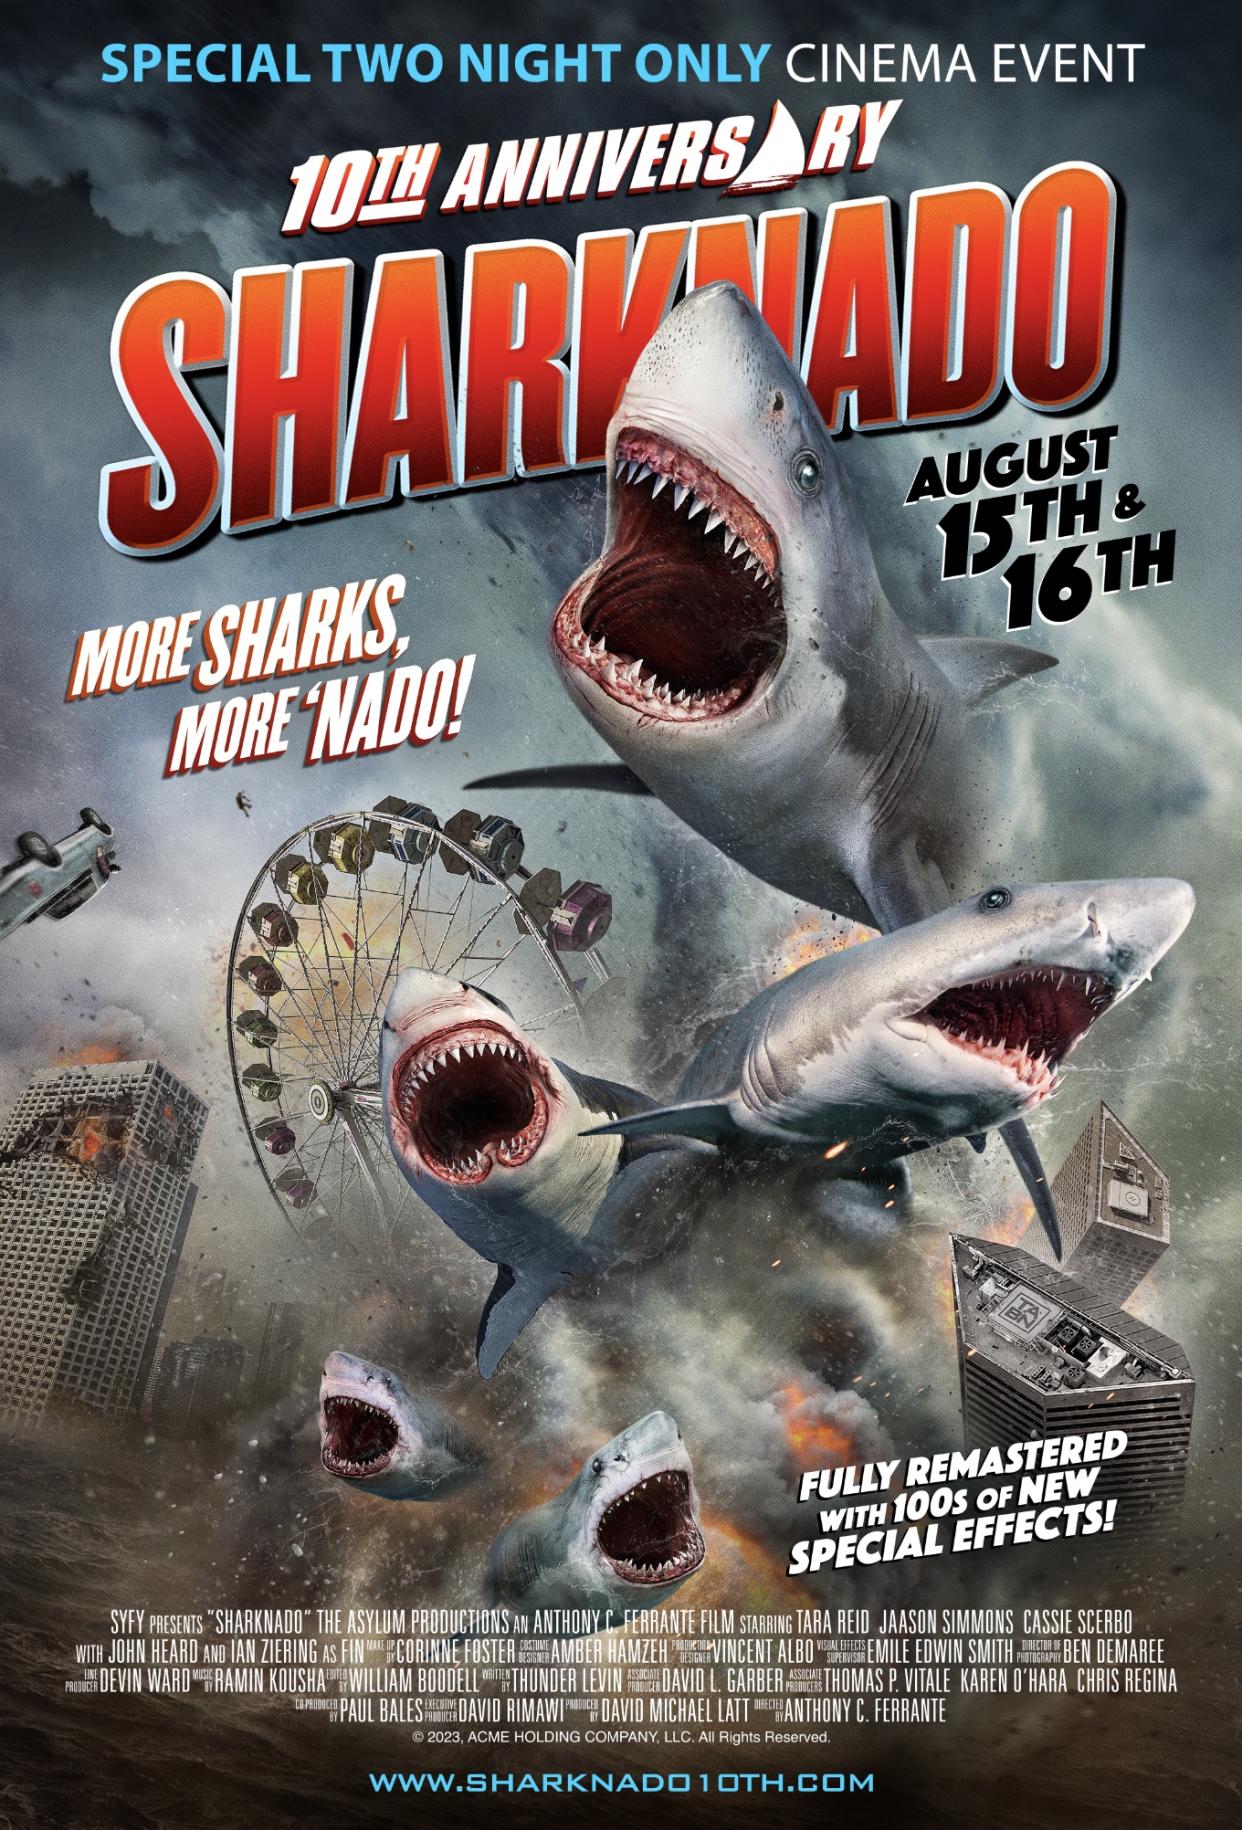 Here's your first look at the poster for Sharknado's 10th anniversary theatrical release. (Photo: Courtesy The Asylum)